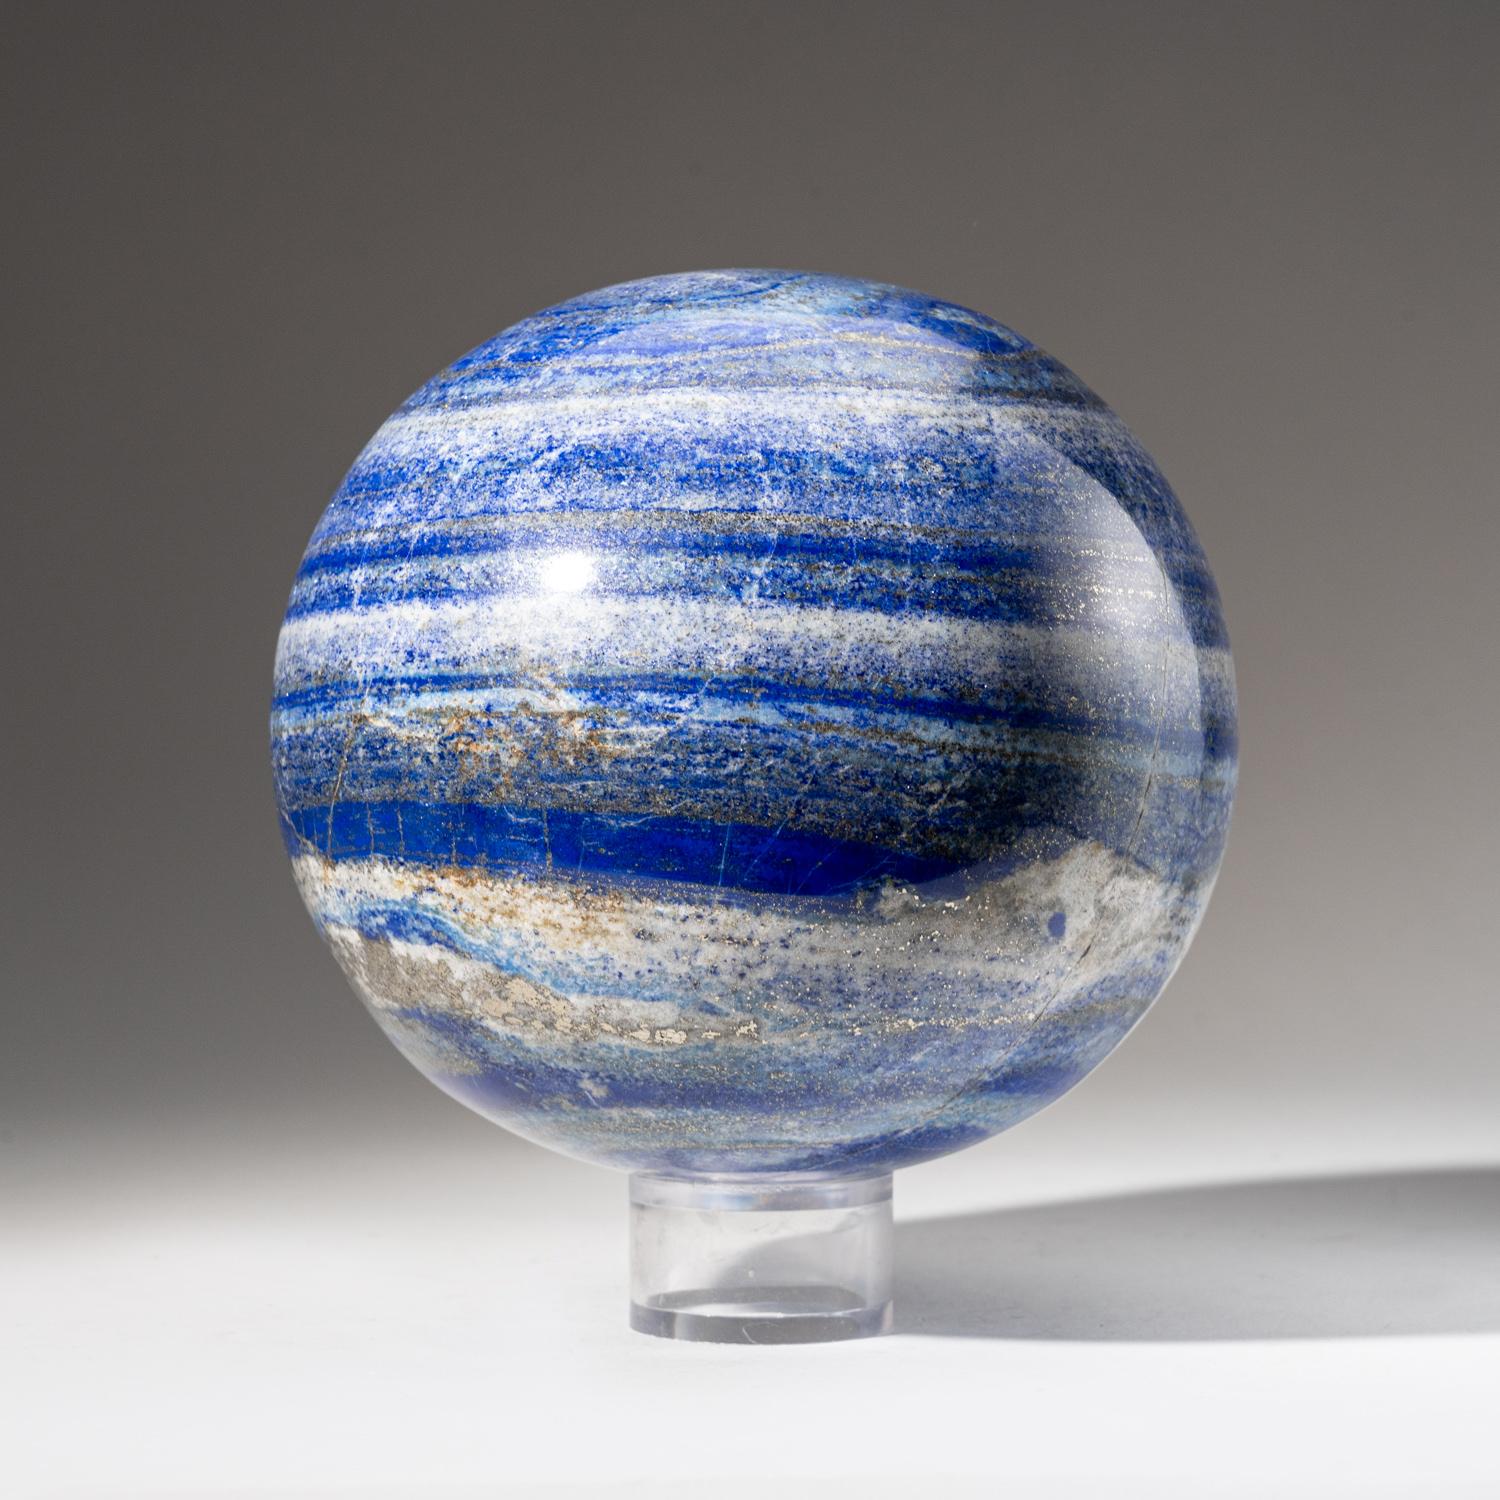 Contemporary Polished Lapis Lazuli Sphere from Afghanistan (5.5